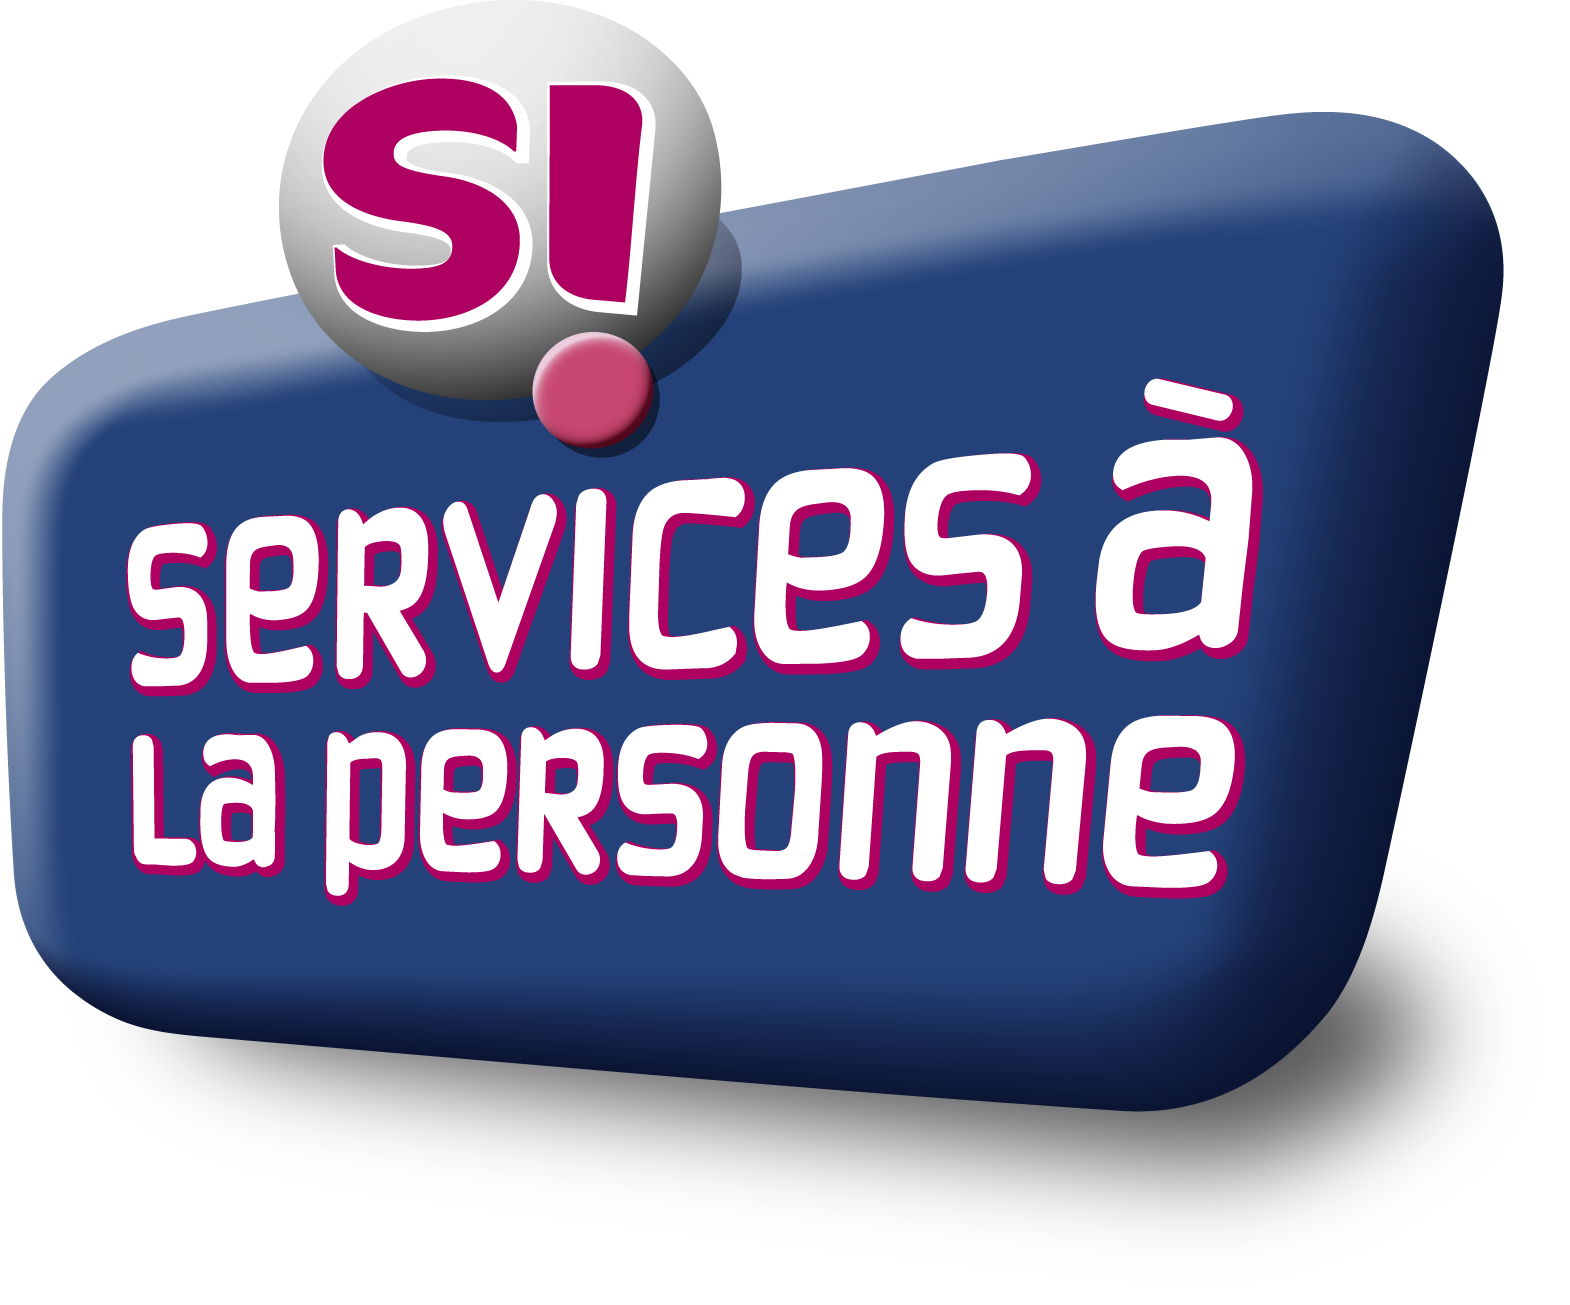 ServicesALaPersonne